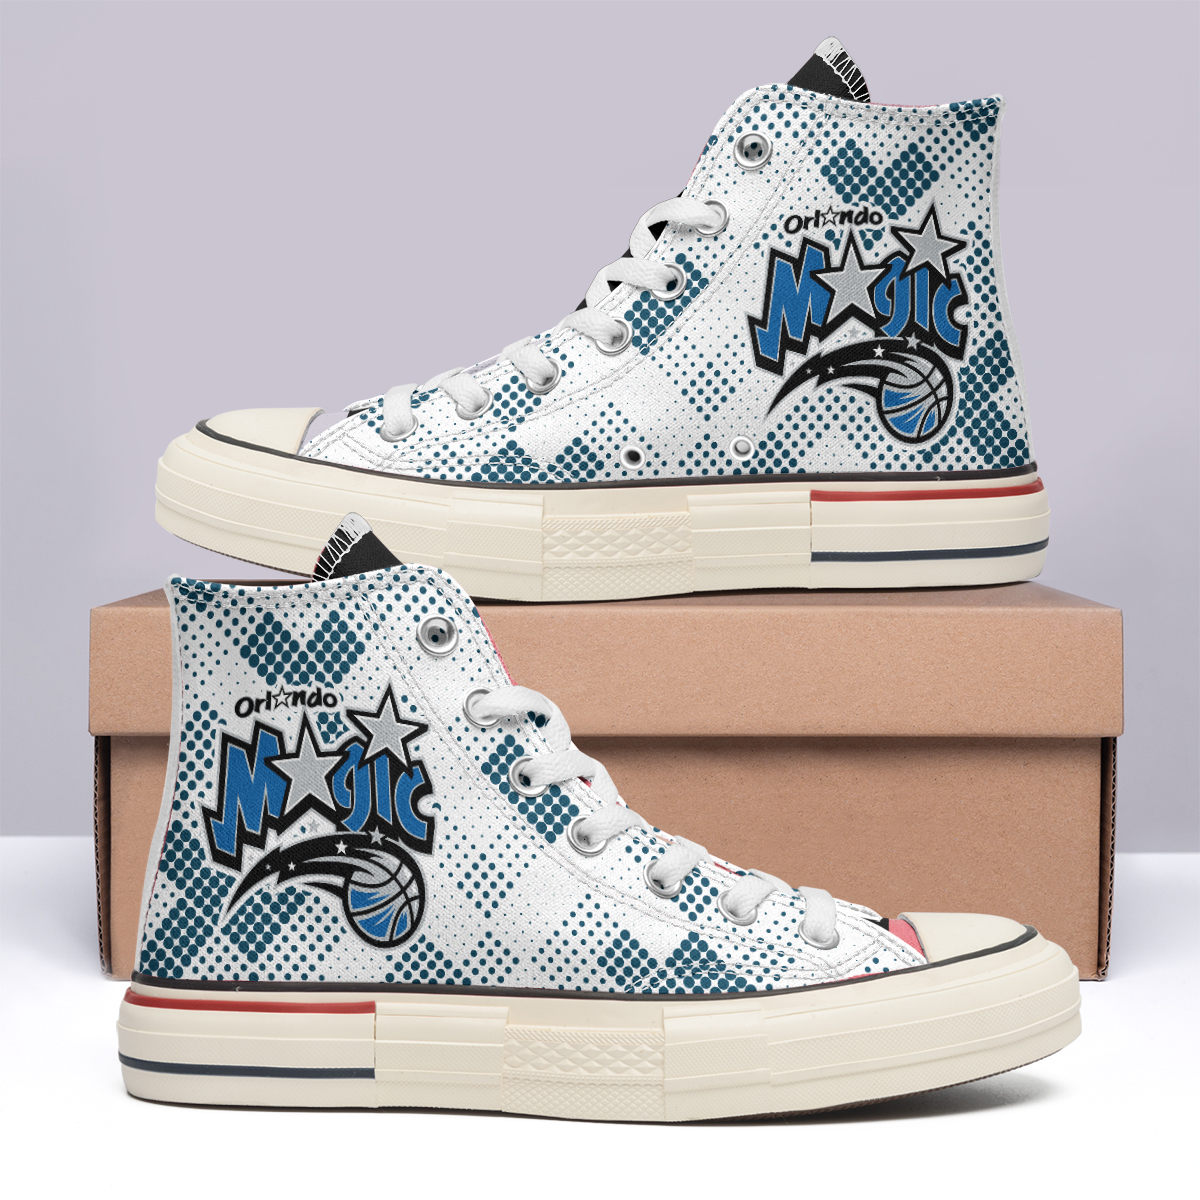 Minnesota Timberwolves High Top Canvas Shoes Special Edition